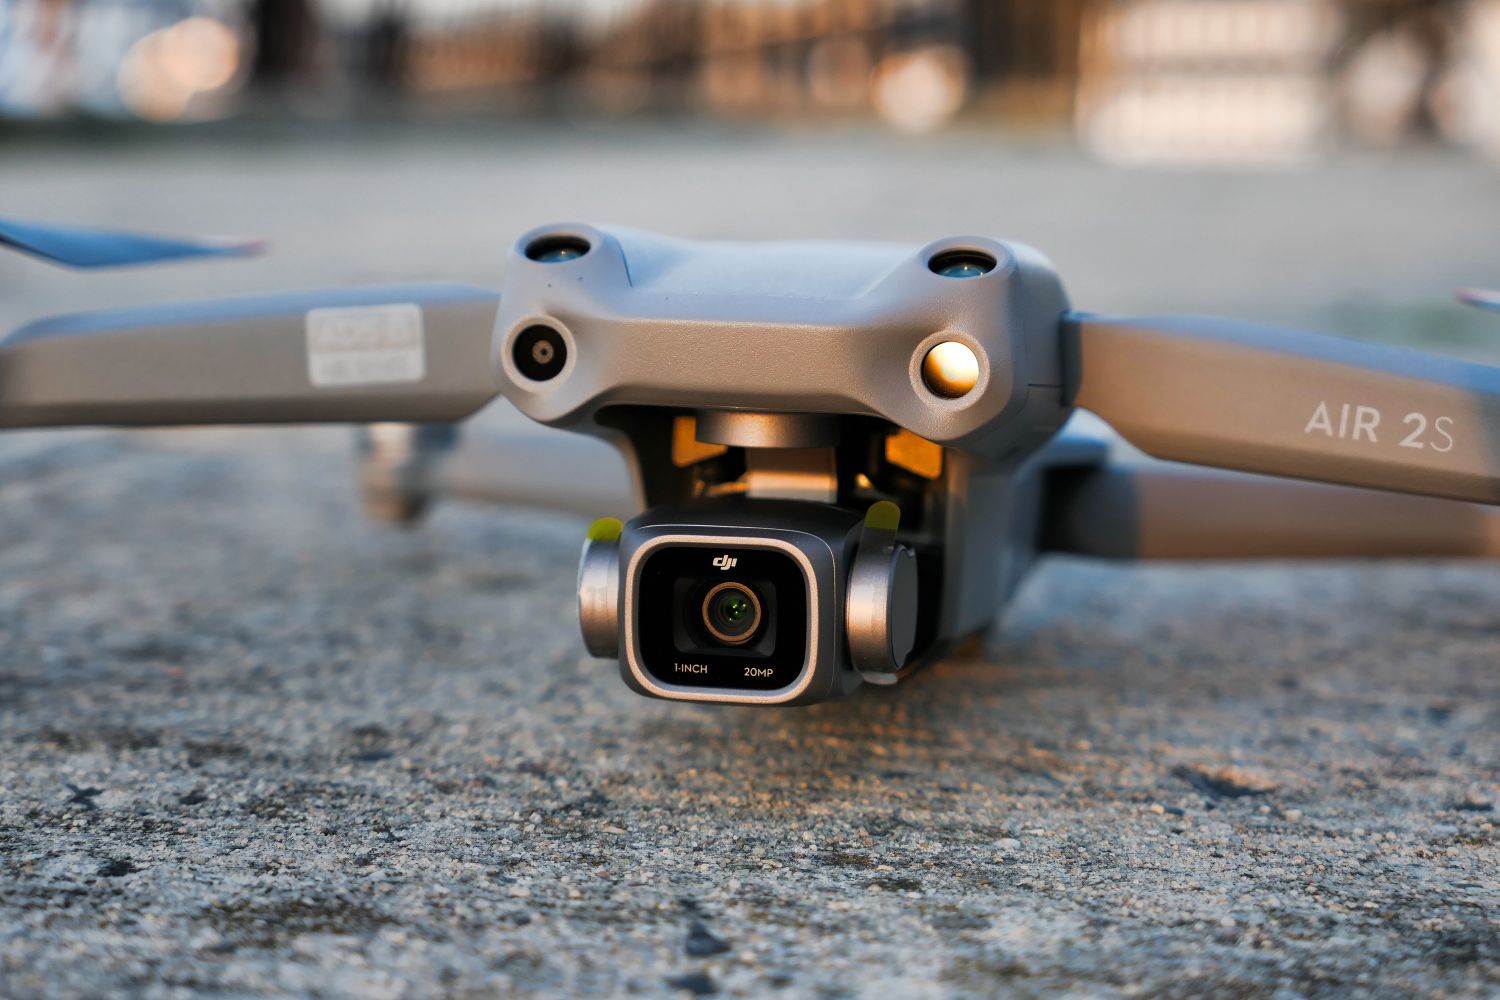 DJI Air 2S Review: Superb Results Without the Work